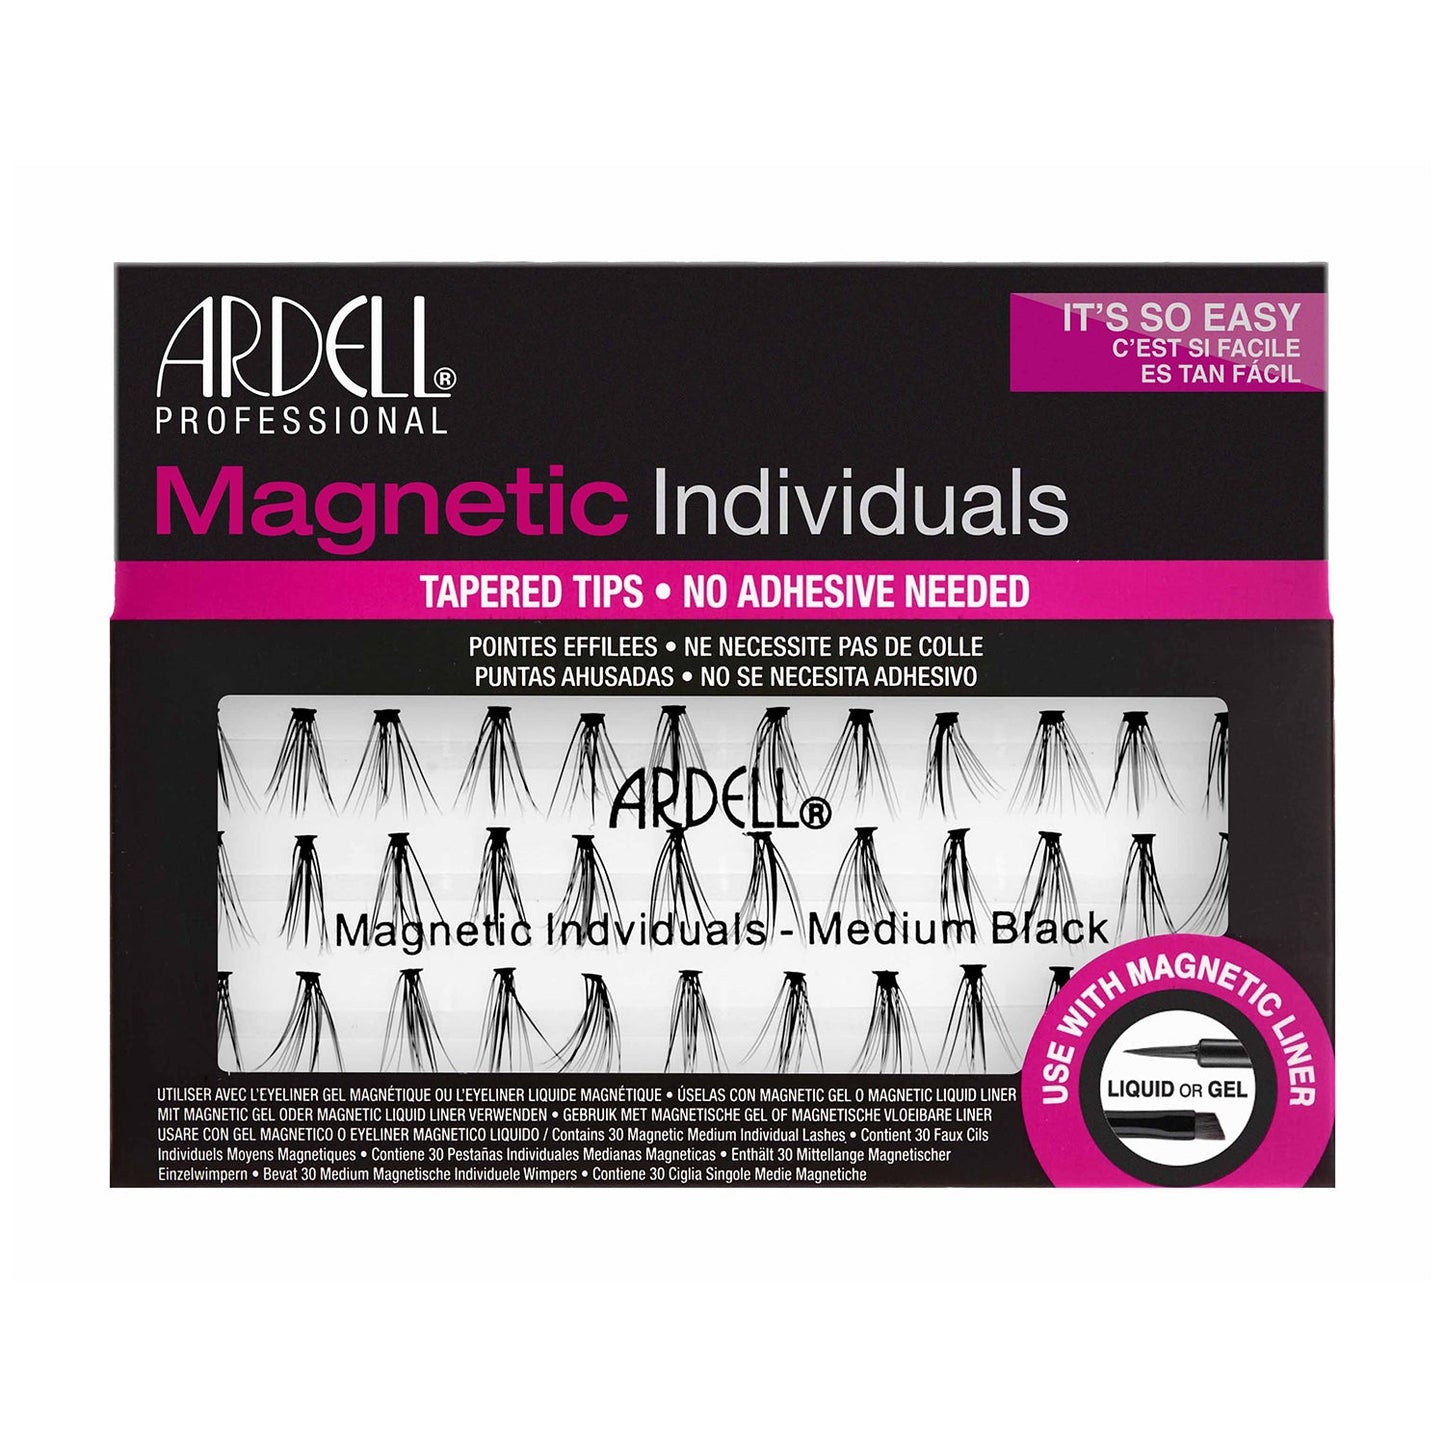 ARDELL Magnetic Individuals